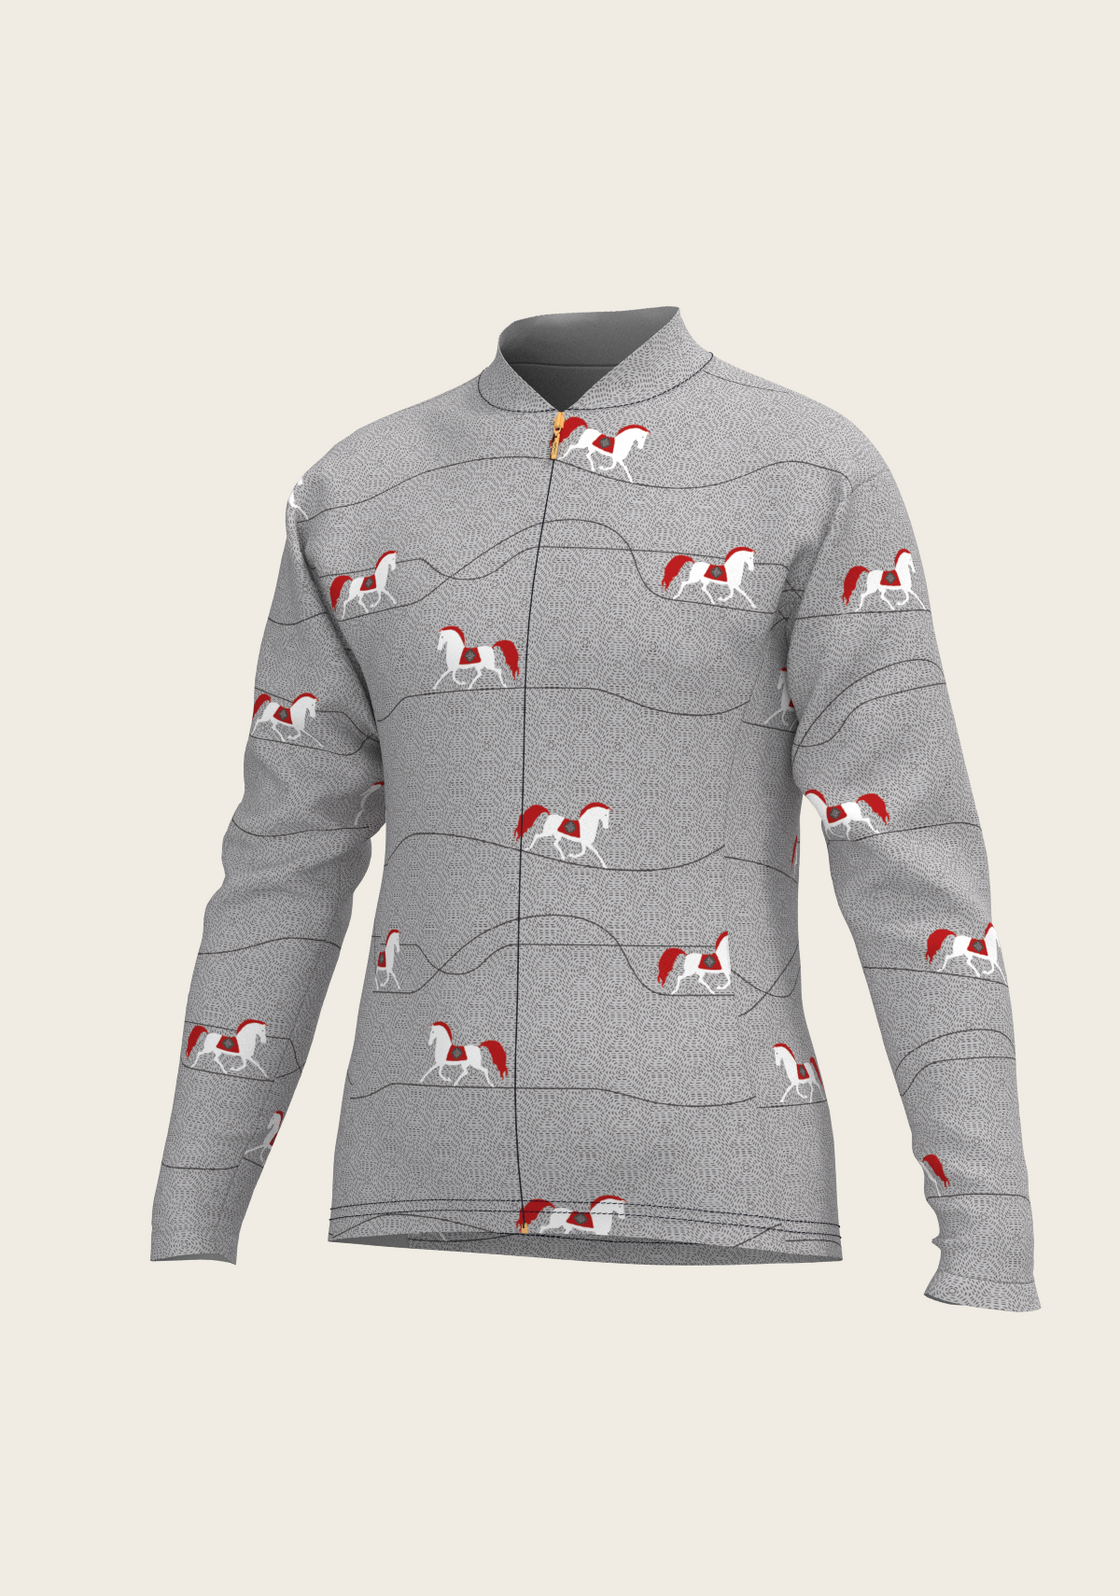 Red Horse on Grey Mountain Children's Long Sleeve Shirt